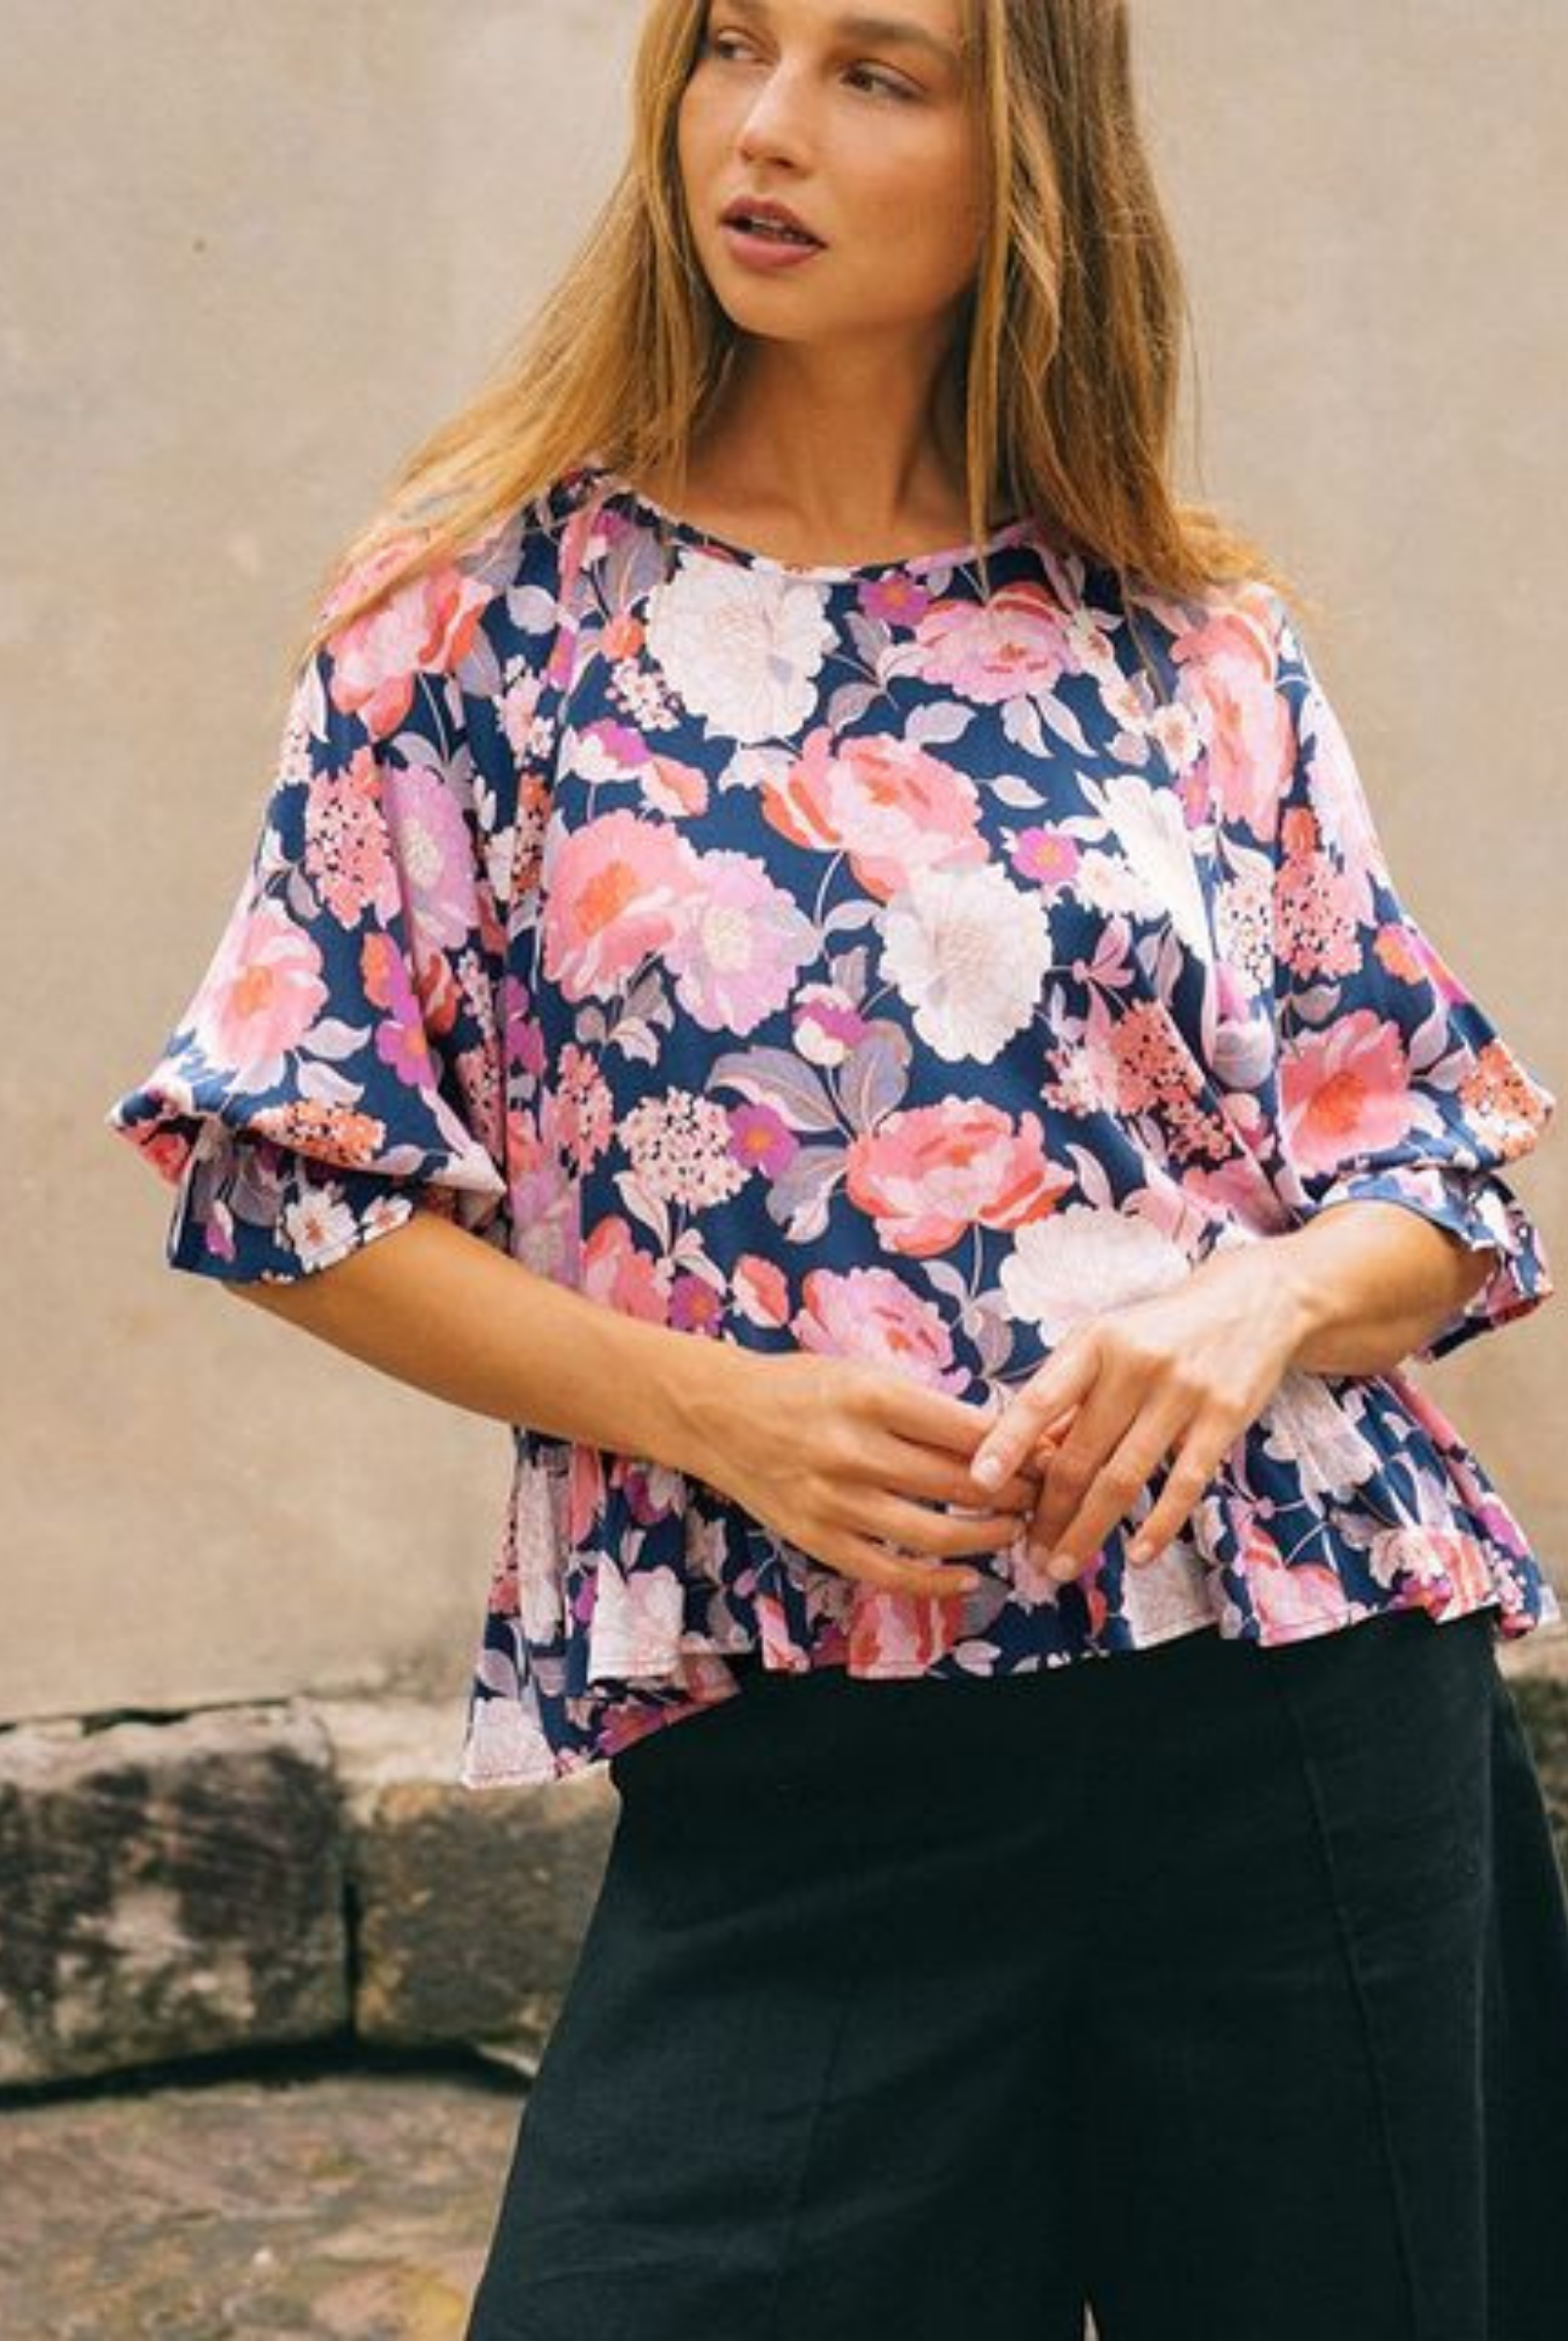 FLORAL PRINT TOP FROM EBBY AND I AUSTRALIA